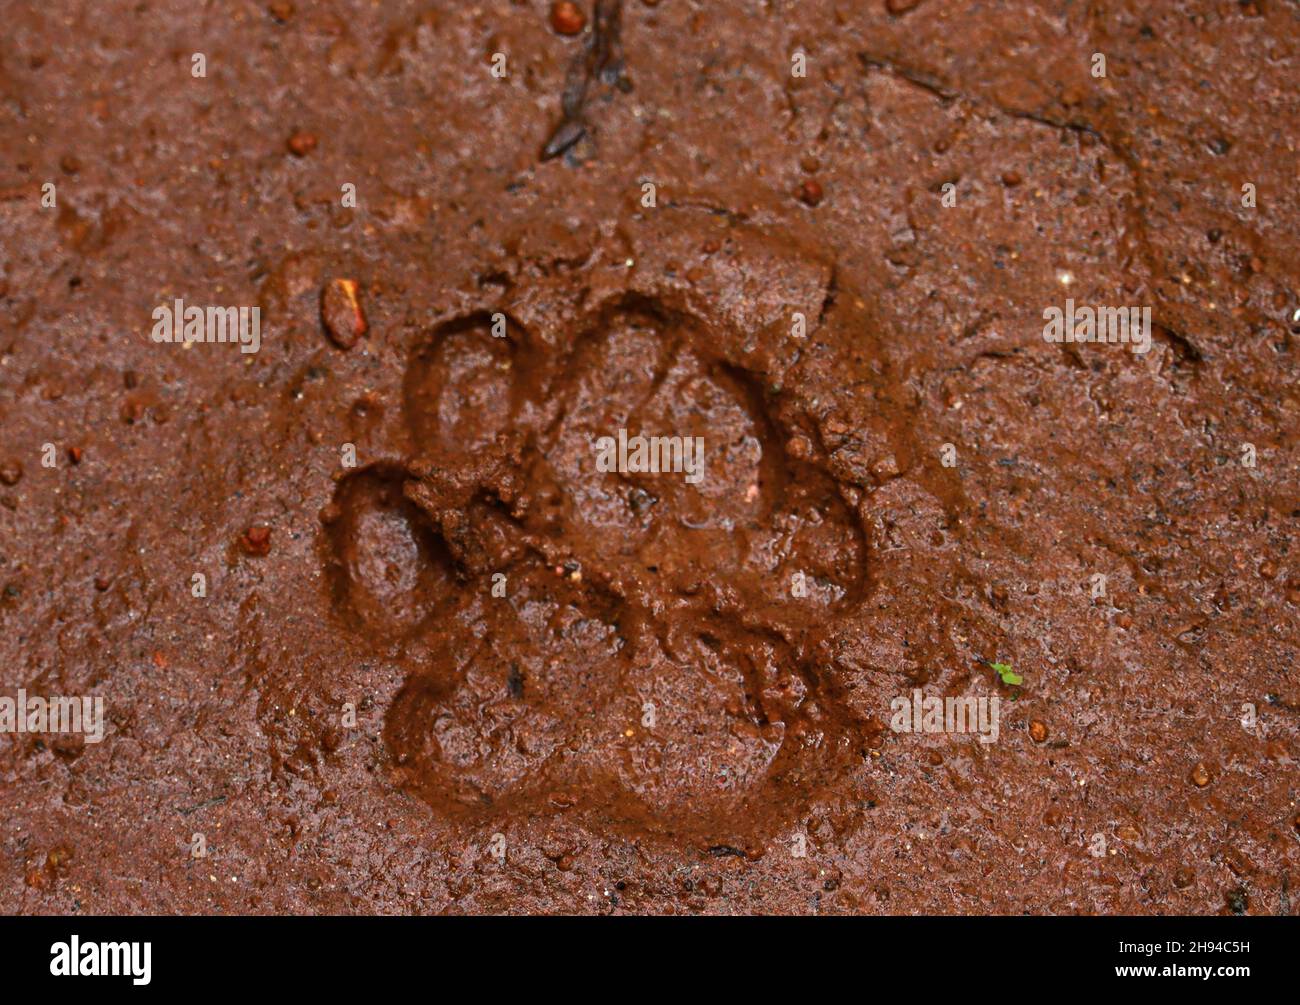 Footprint of a dog in the mud Stock Photo